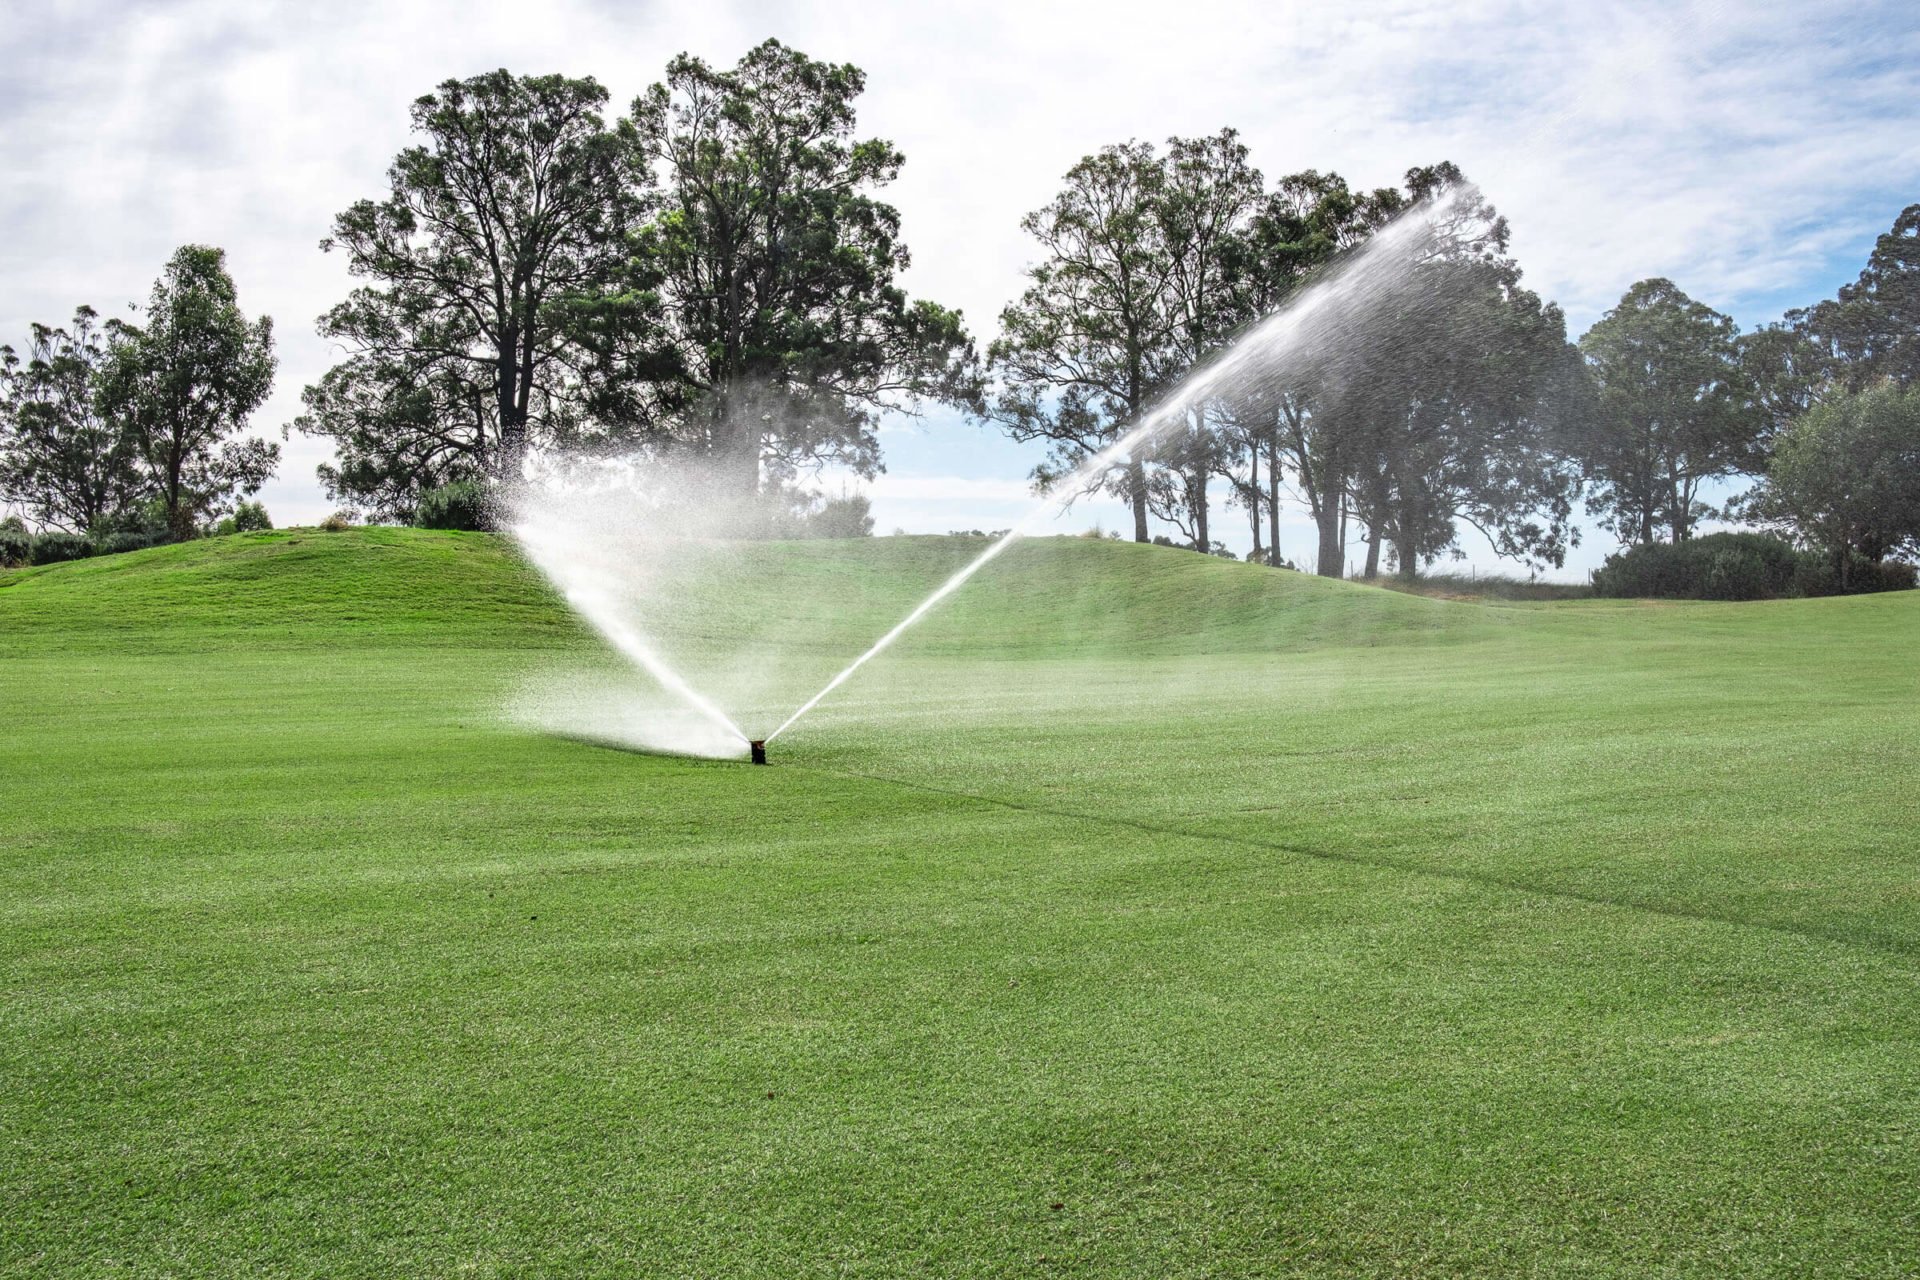 Irrigation in use